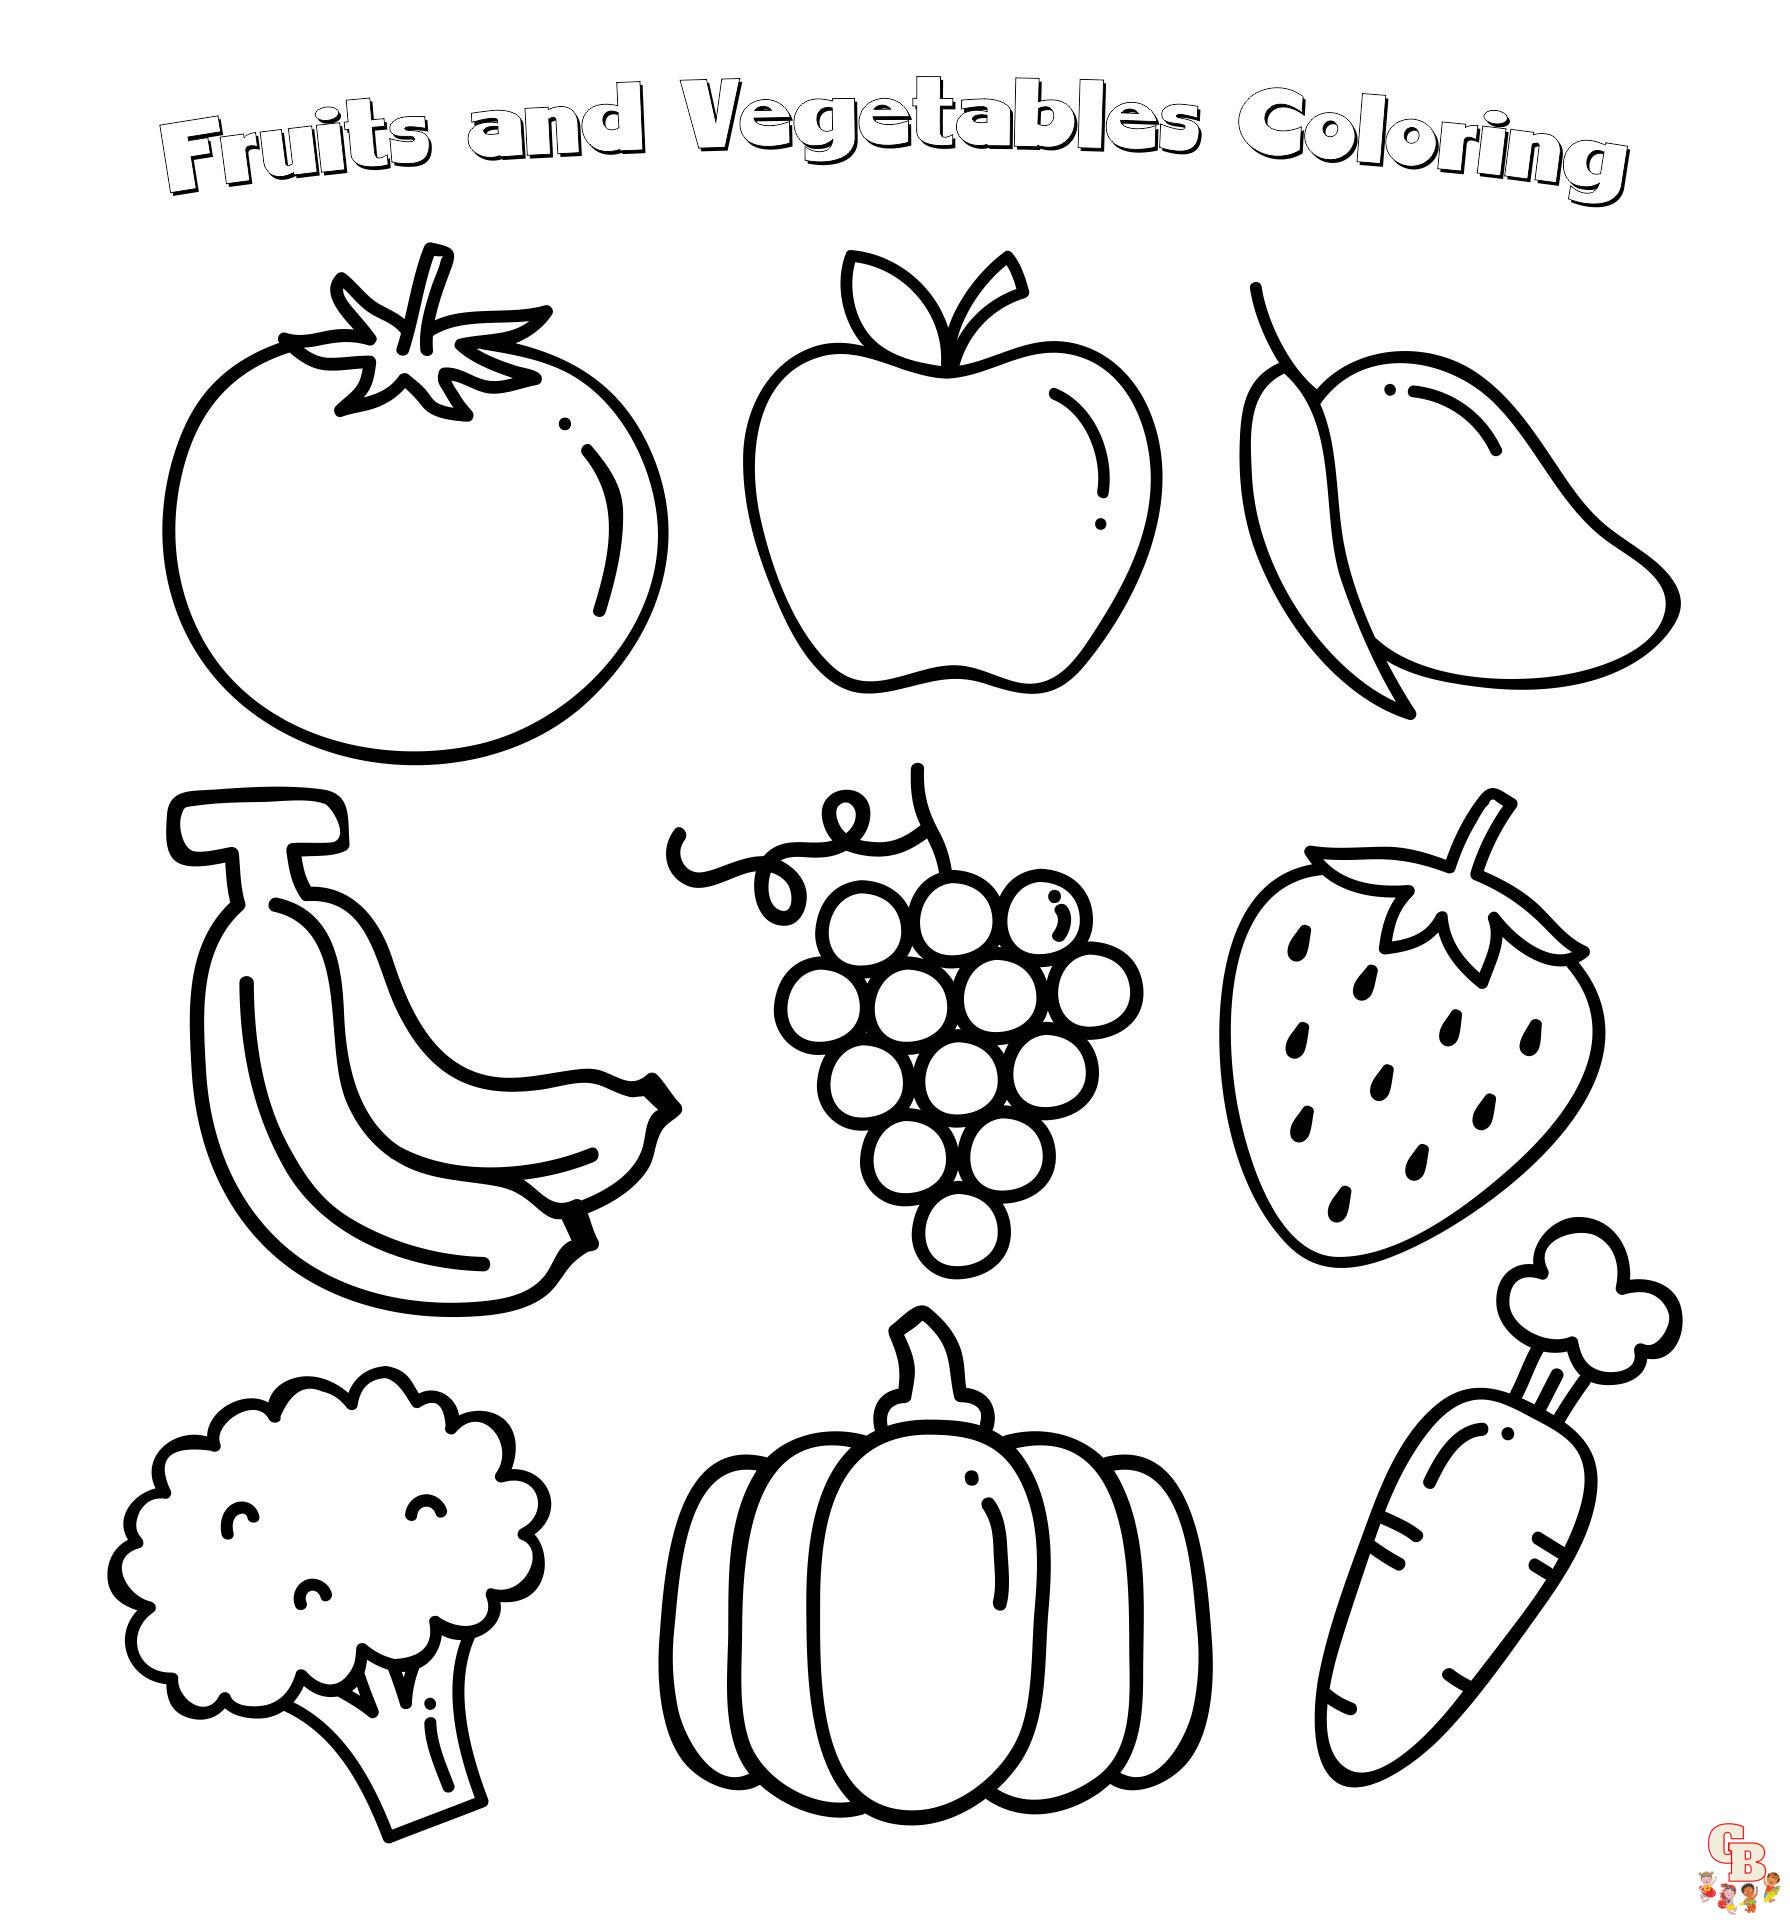 Printable Fruit and Vegetable Coloring Pages GBcoloring